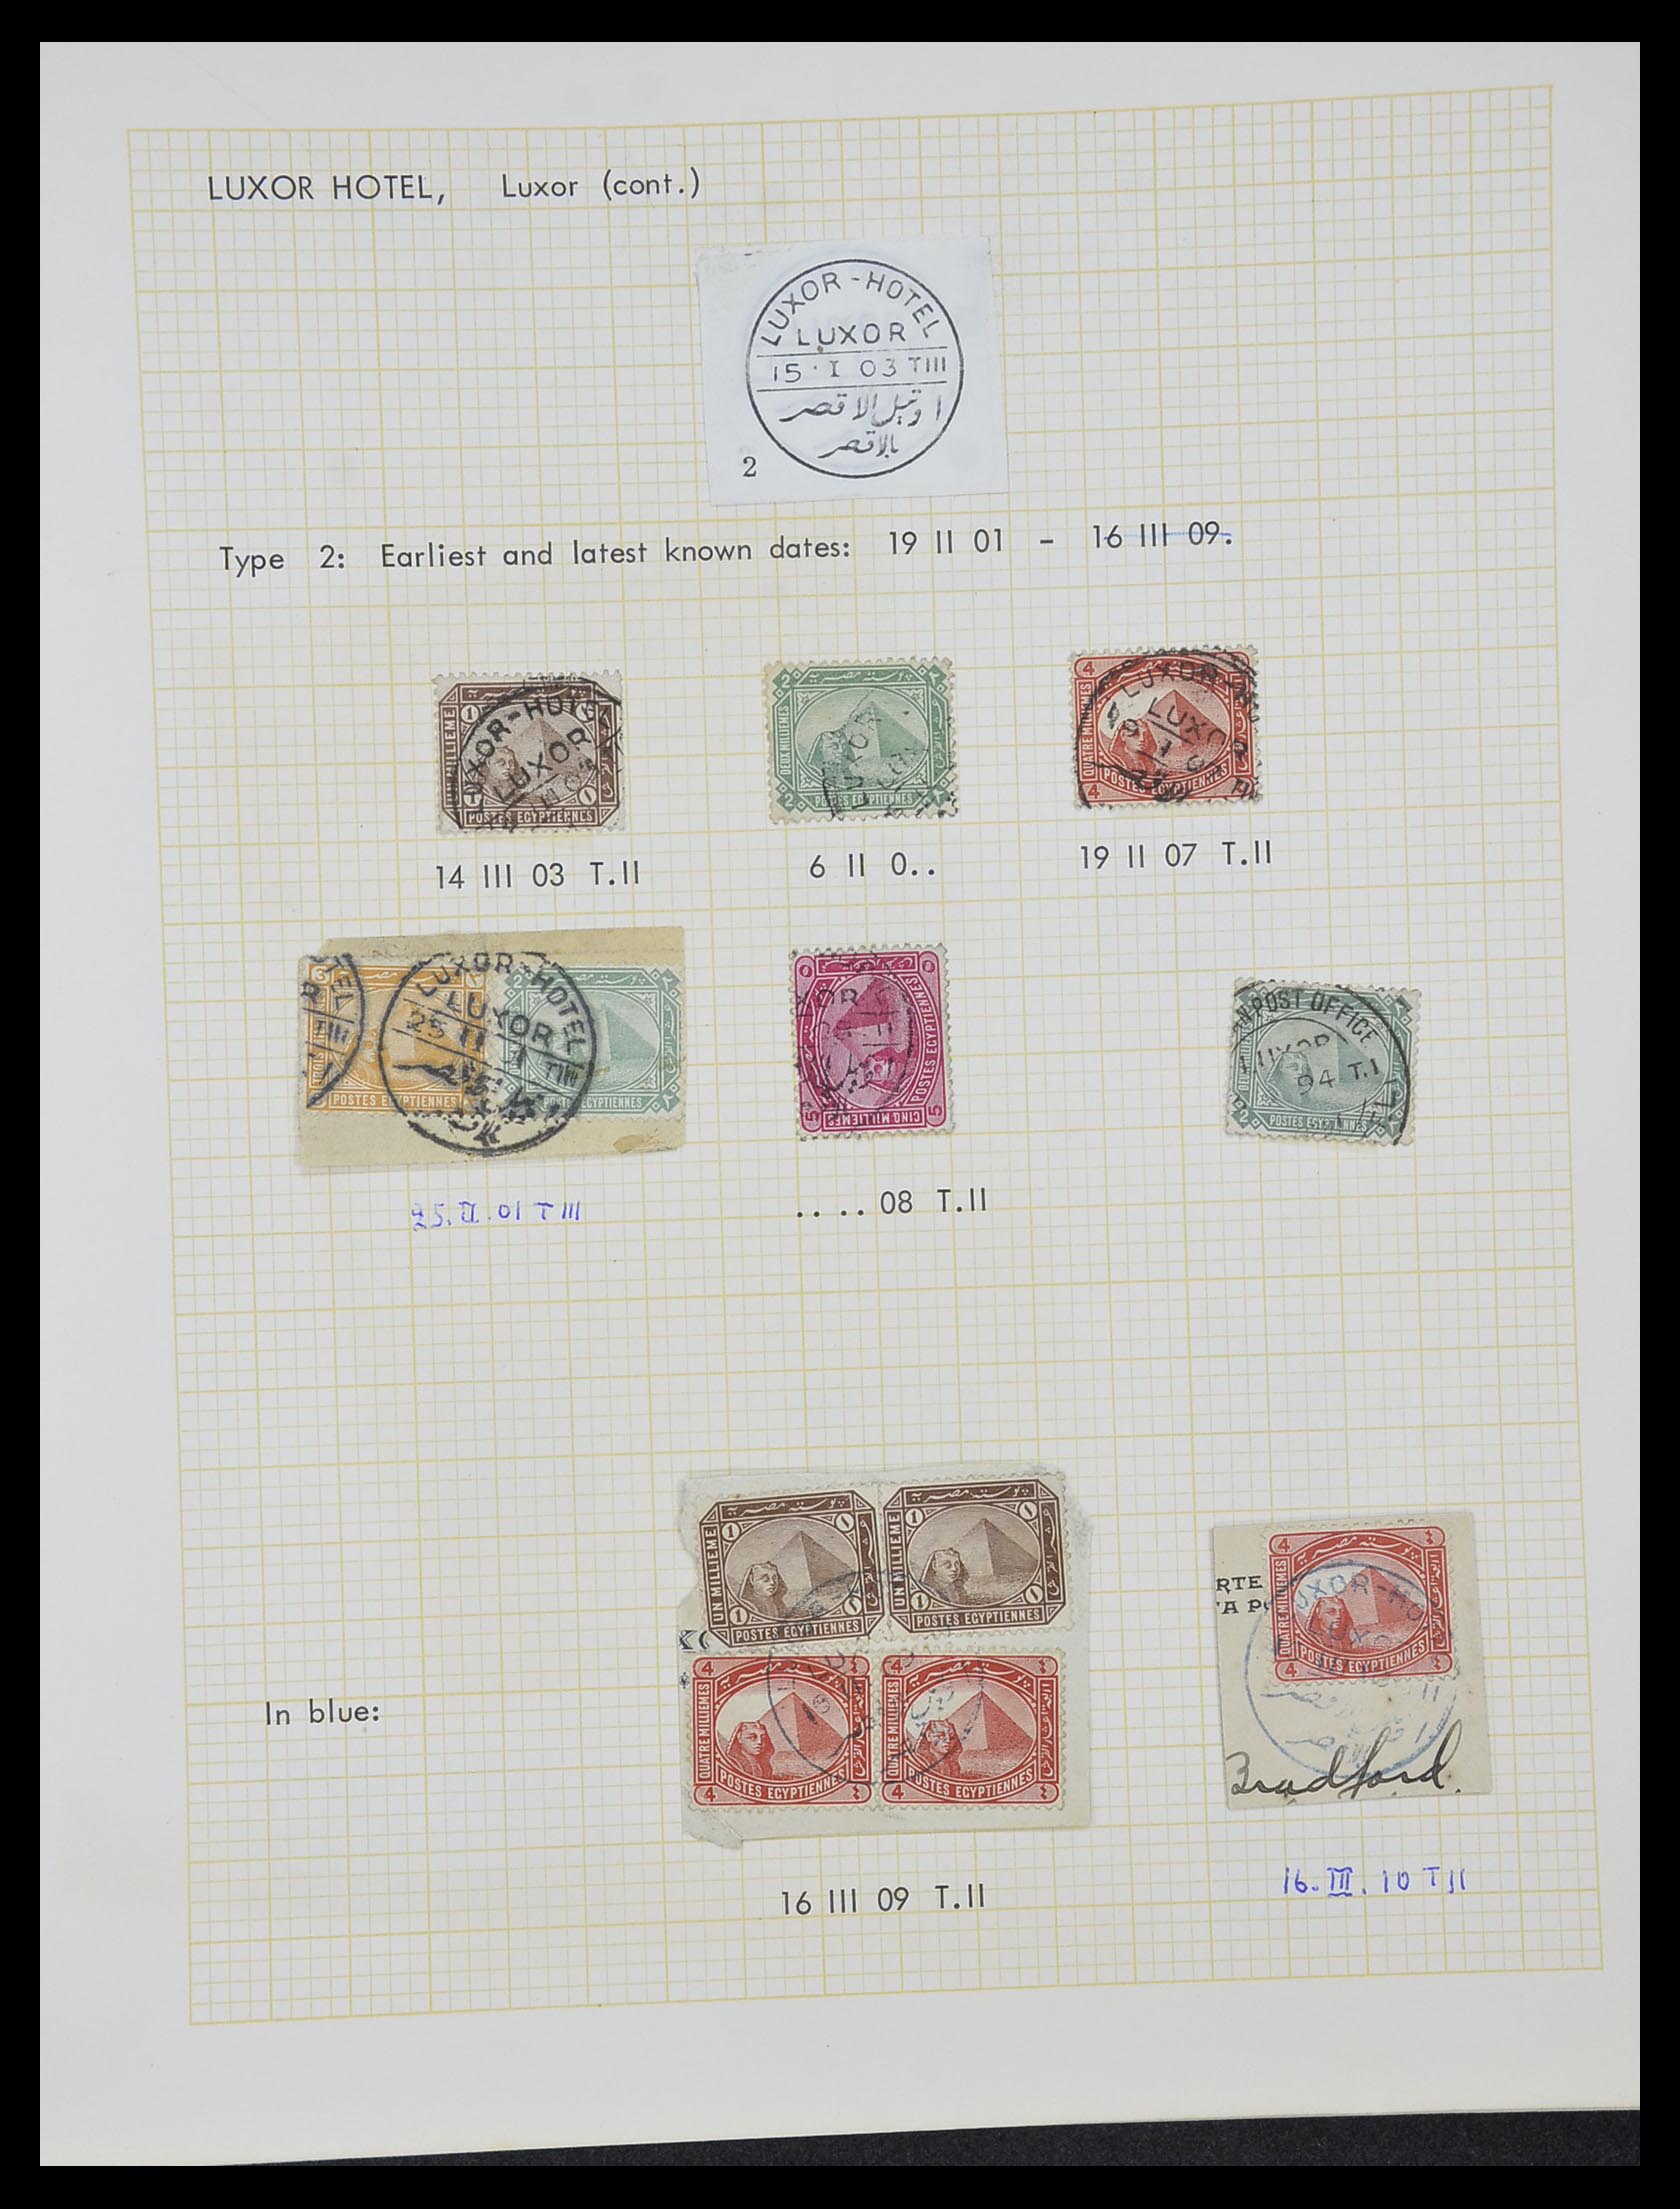 33994 033 - Stamp collection 33994 Egypt hotel cancels 1900-1935.